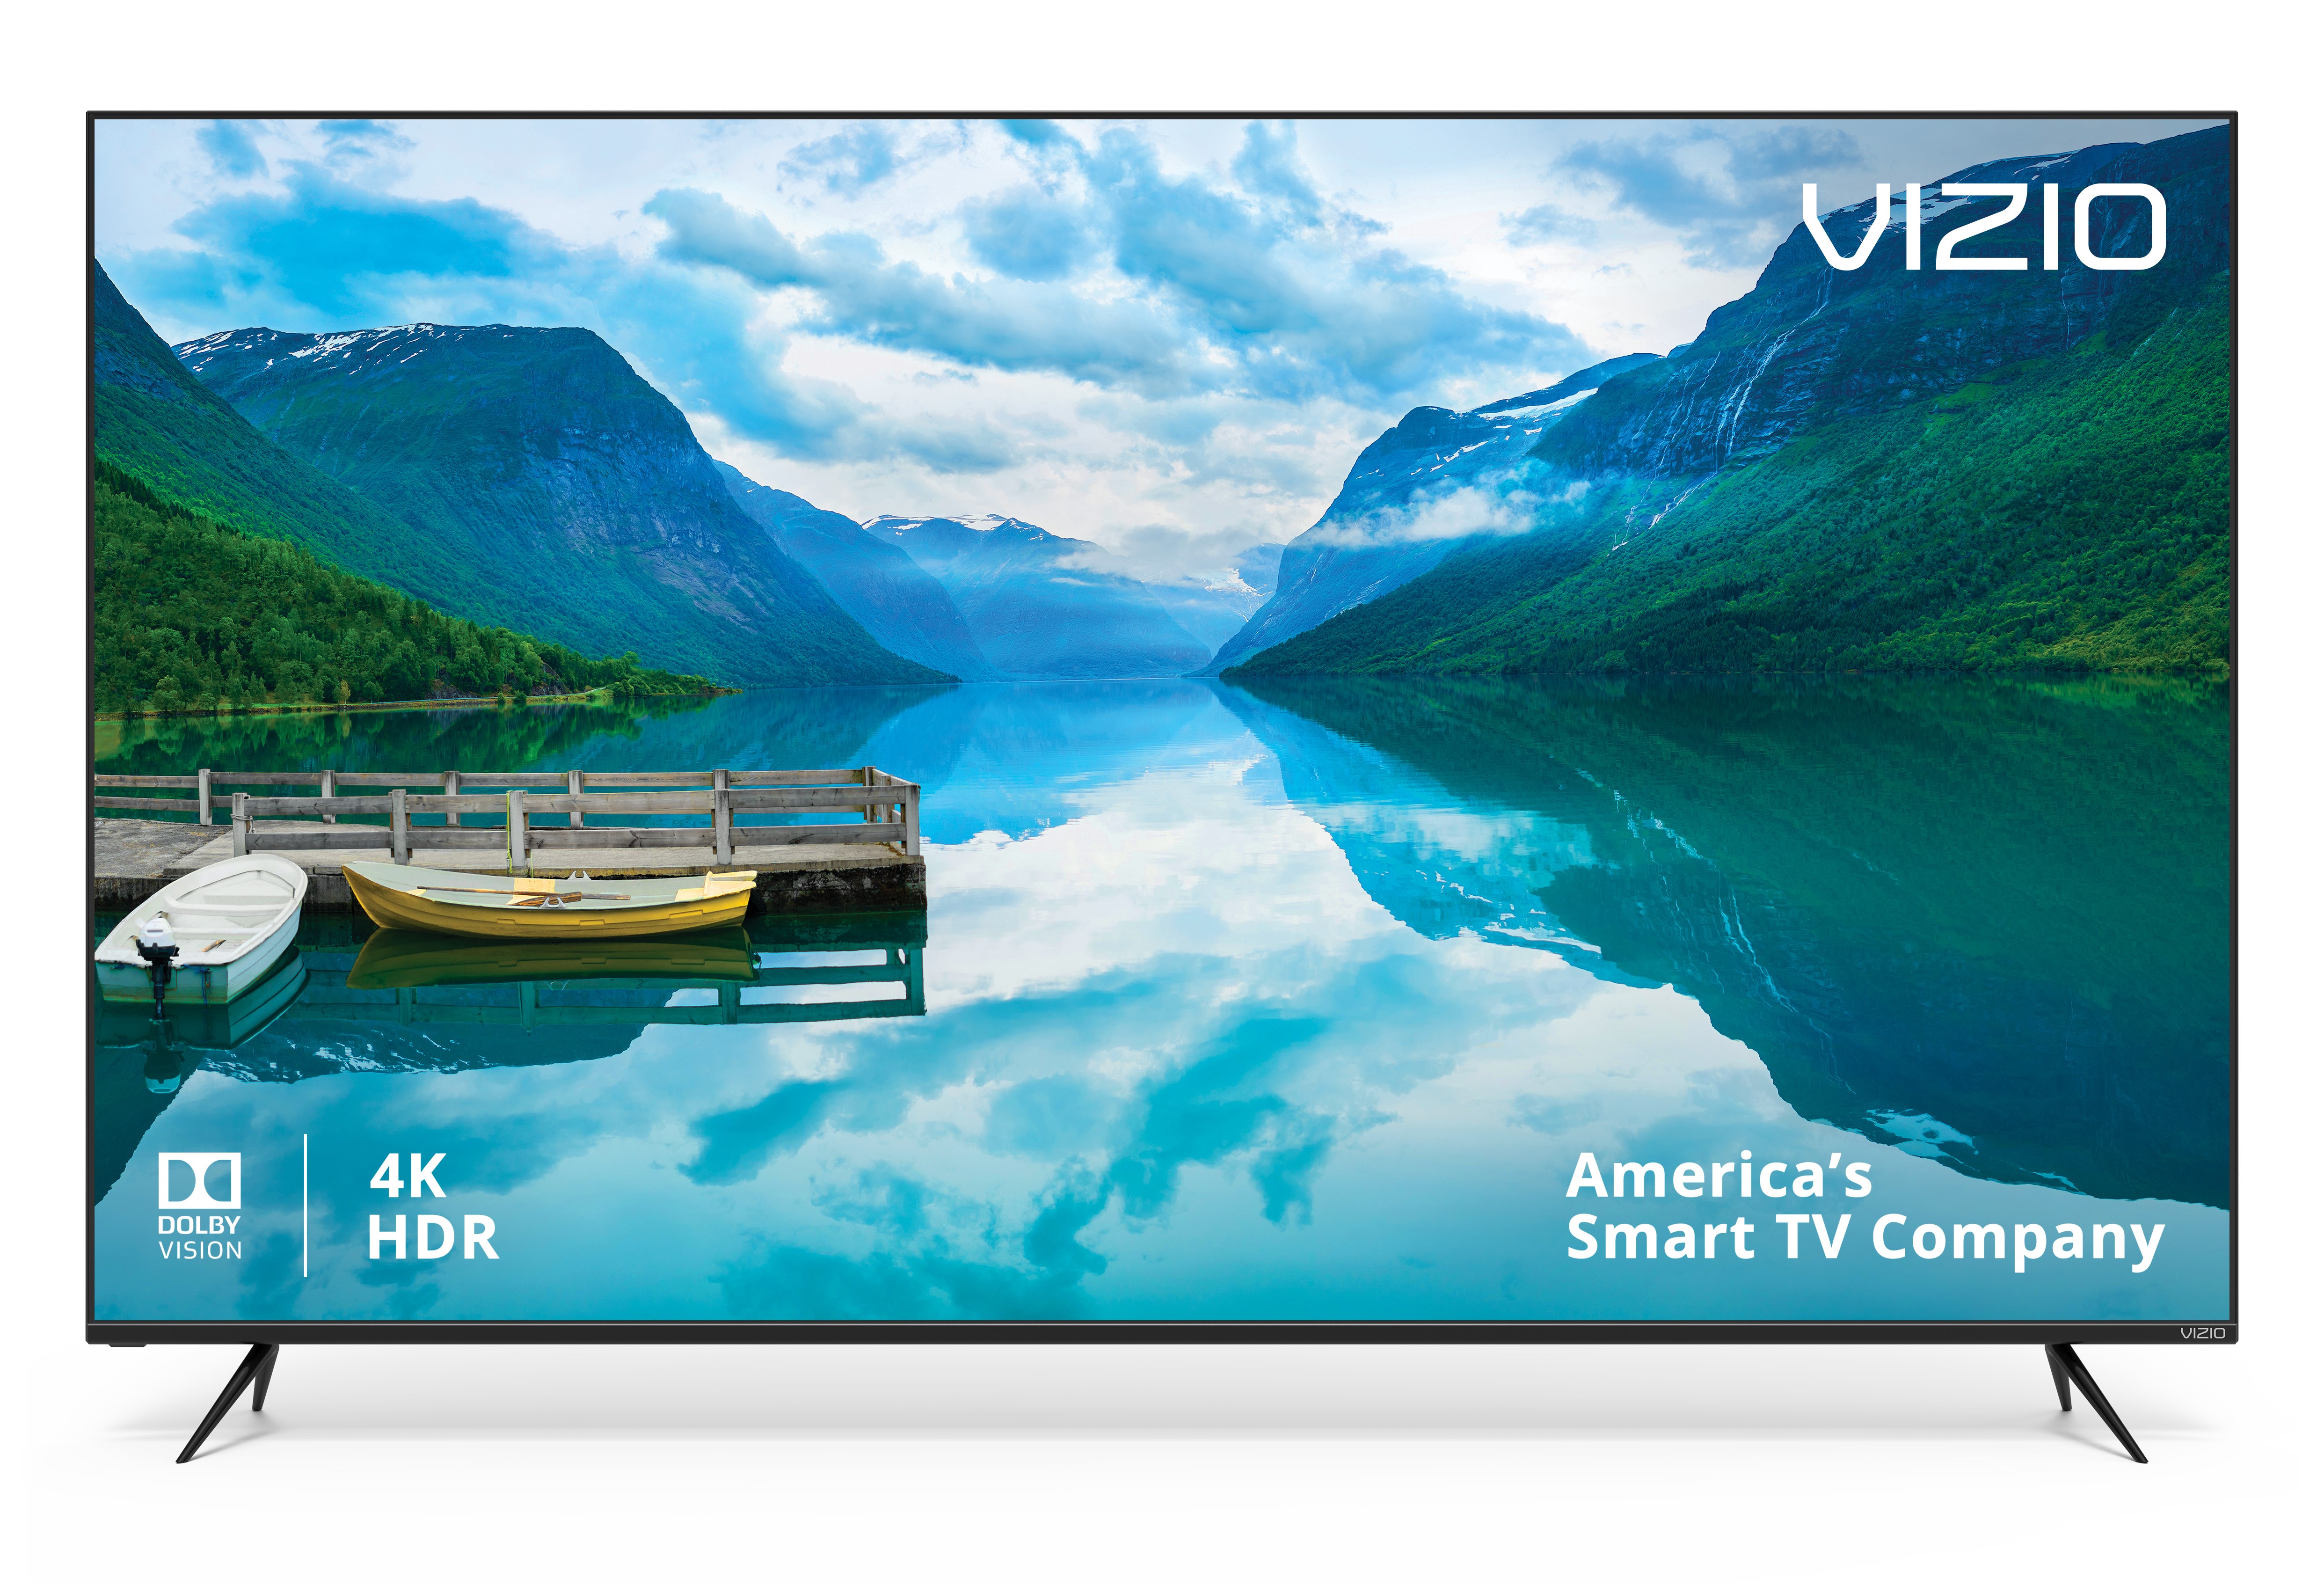 This 65-inch Vizio 4K HDR Smart TV Gets a Huge Price Cut at Walmart